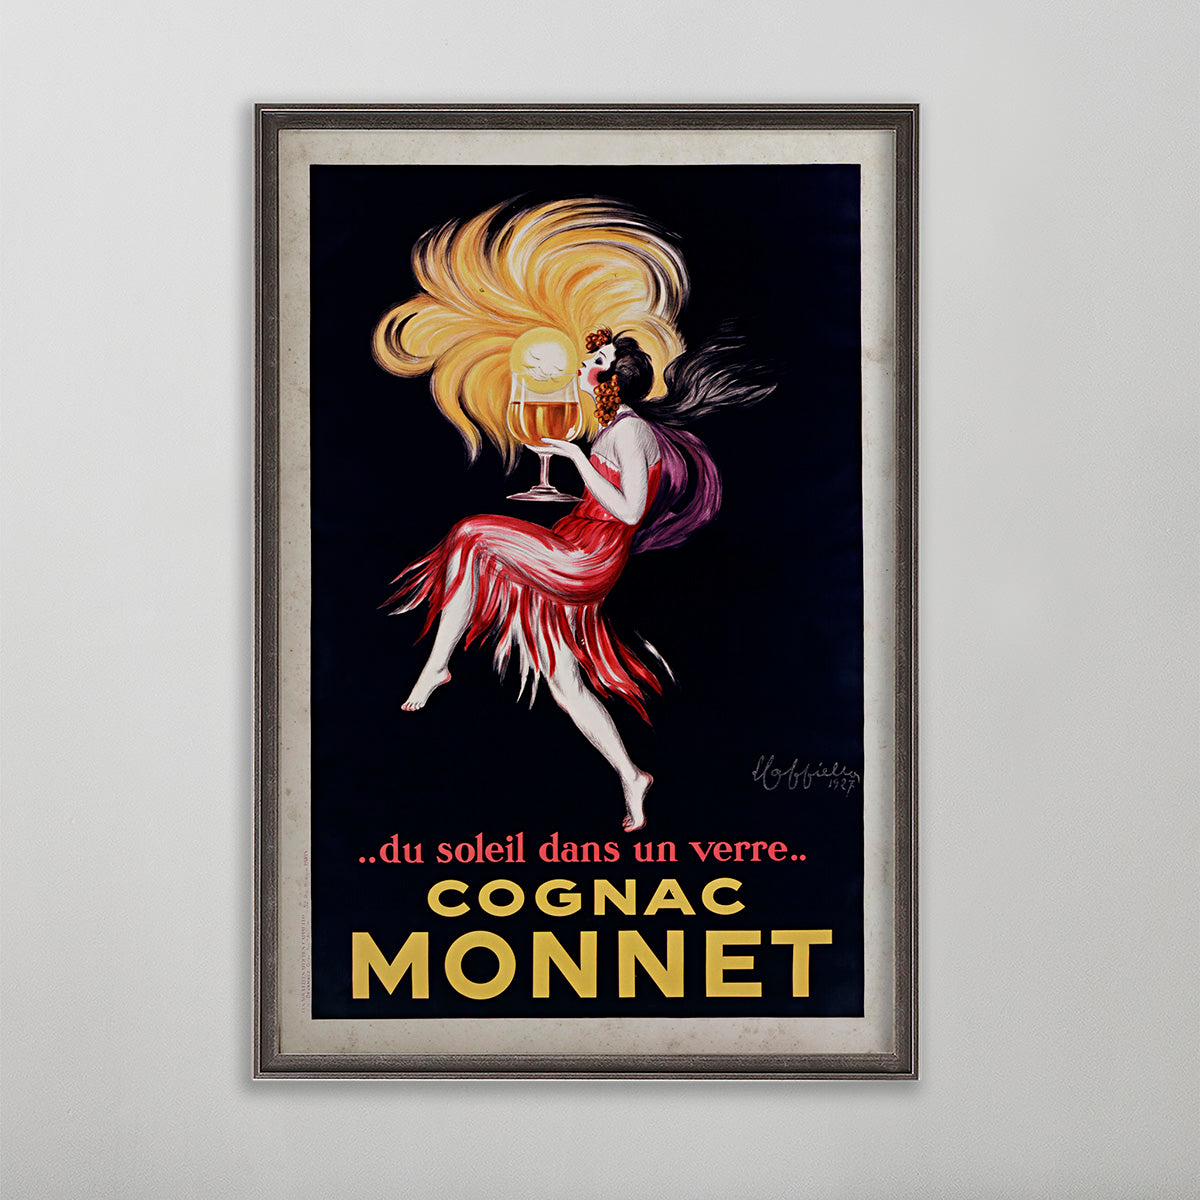 Cognac Monnet vintage poster wall art by leonetto cappiello. Girl with red dress holding drink with sun behind her.